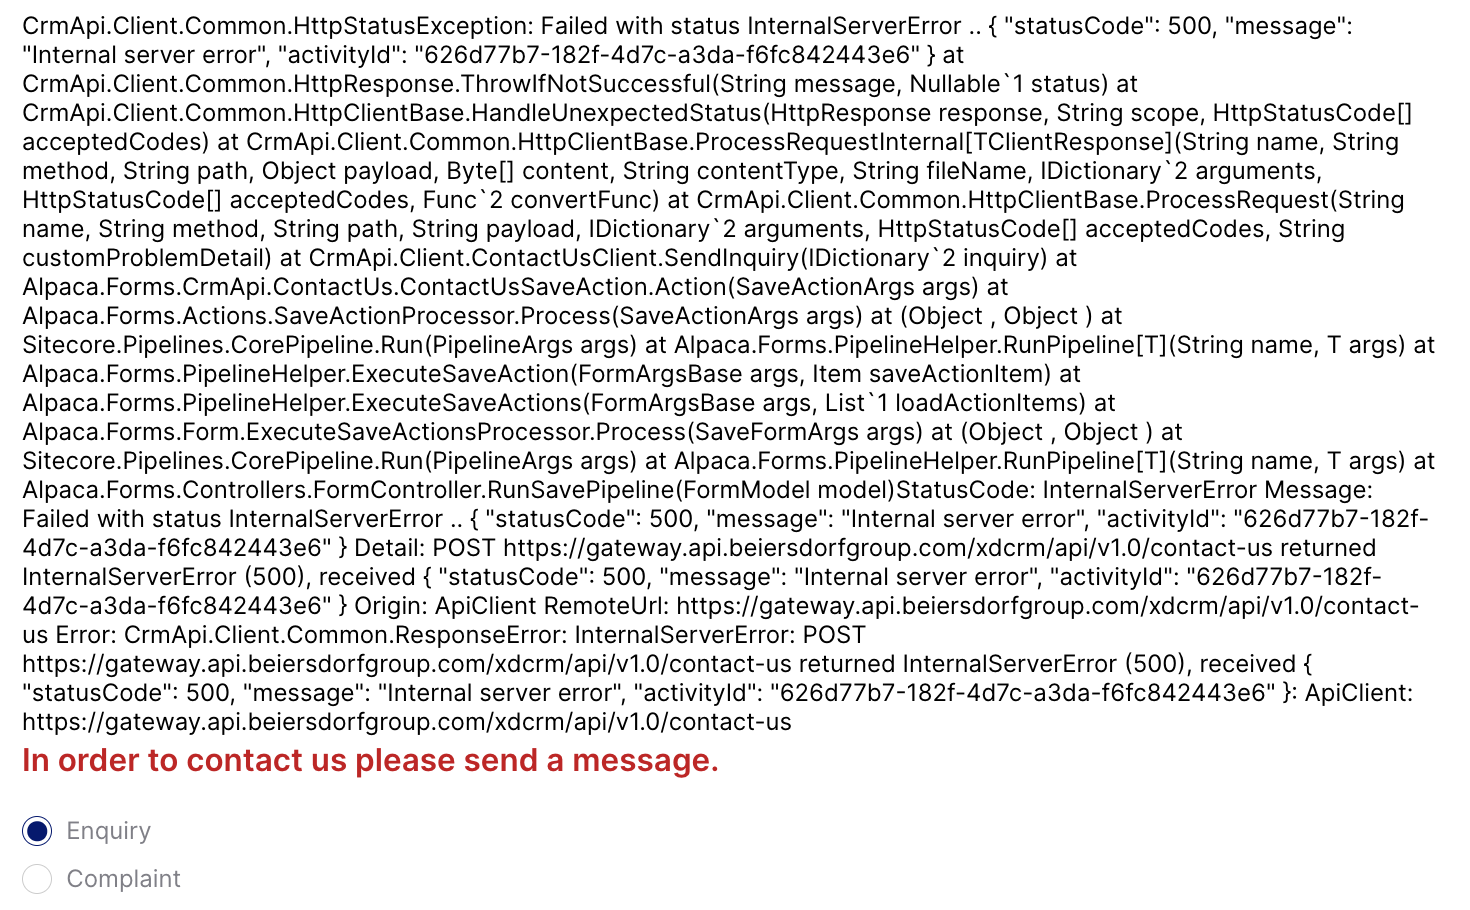 Elastoplast contact form with a very long error message that looks like a stacktrace displayed, beginning 'CrmApi.Client.Common.HttpStatusException: Failed with status InternalServerError...'